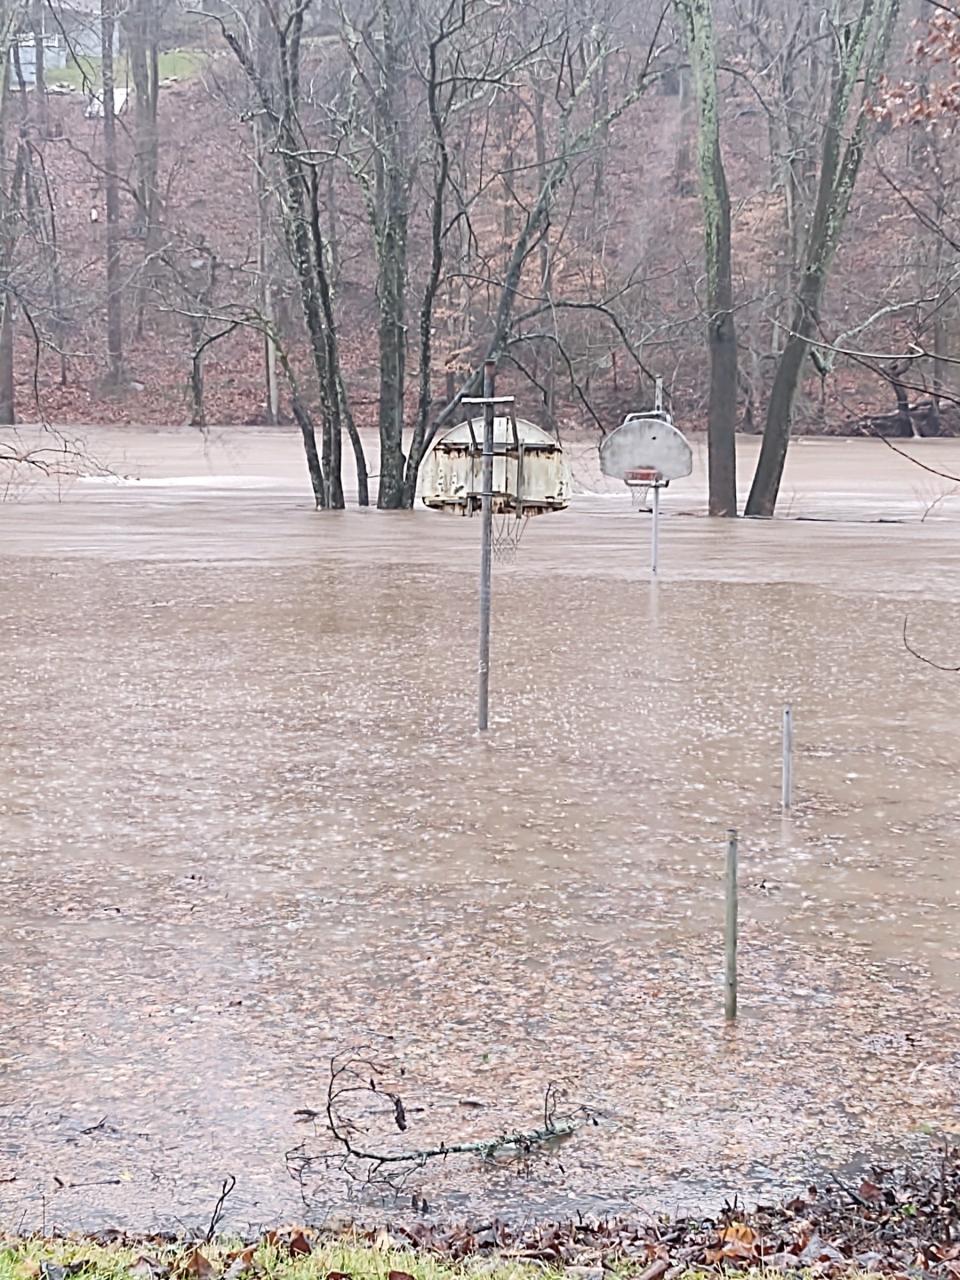 The Neshaminy Creek spills it banks near Periwinkle Park in Middletown and impacts parts of Neshaminy Woods in Lower Southampton. Some streets in the community were under water Monday afternoon.